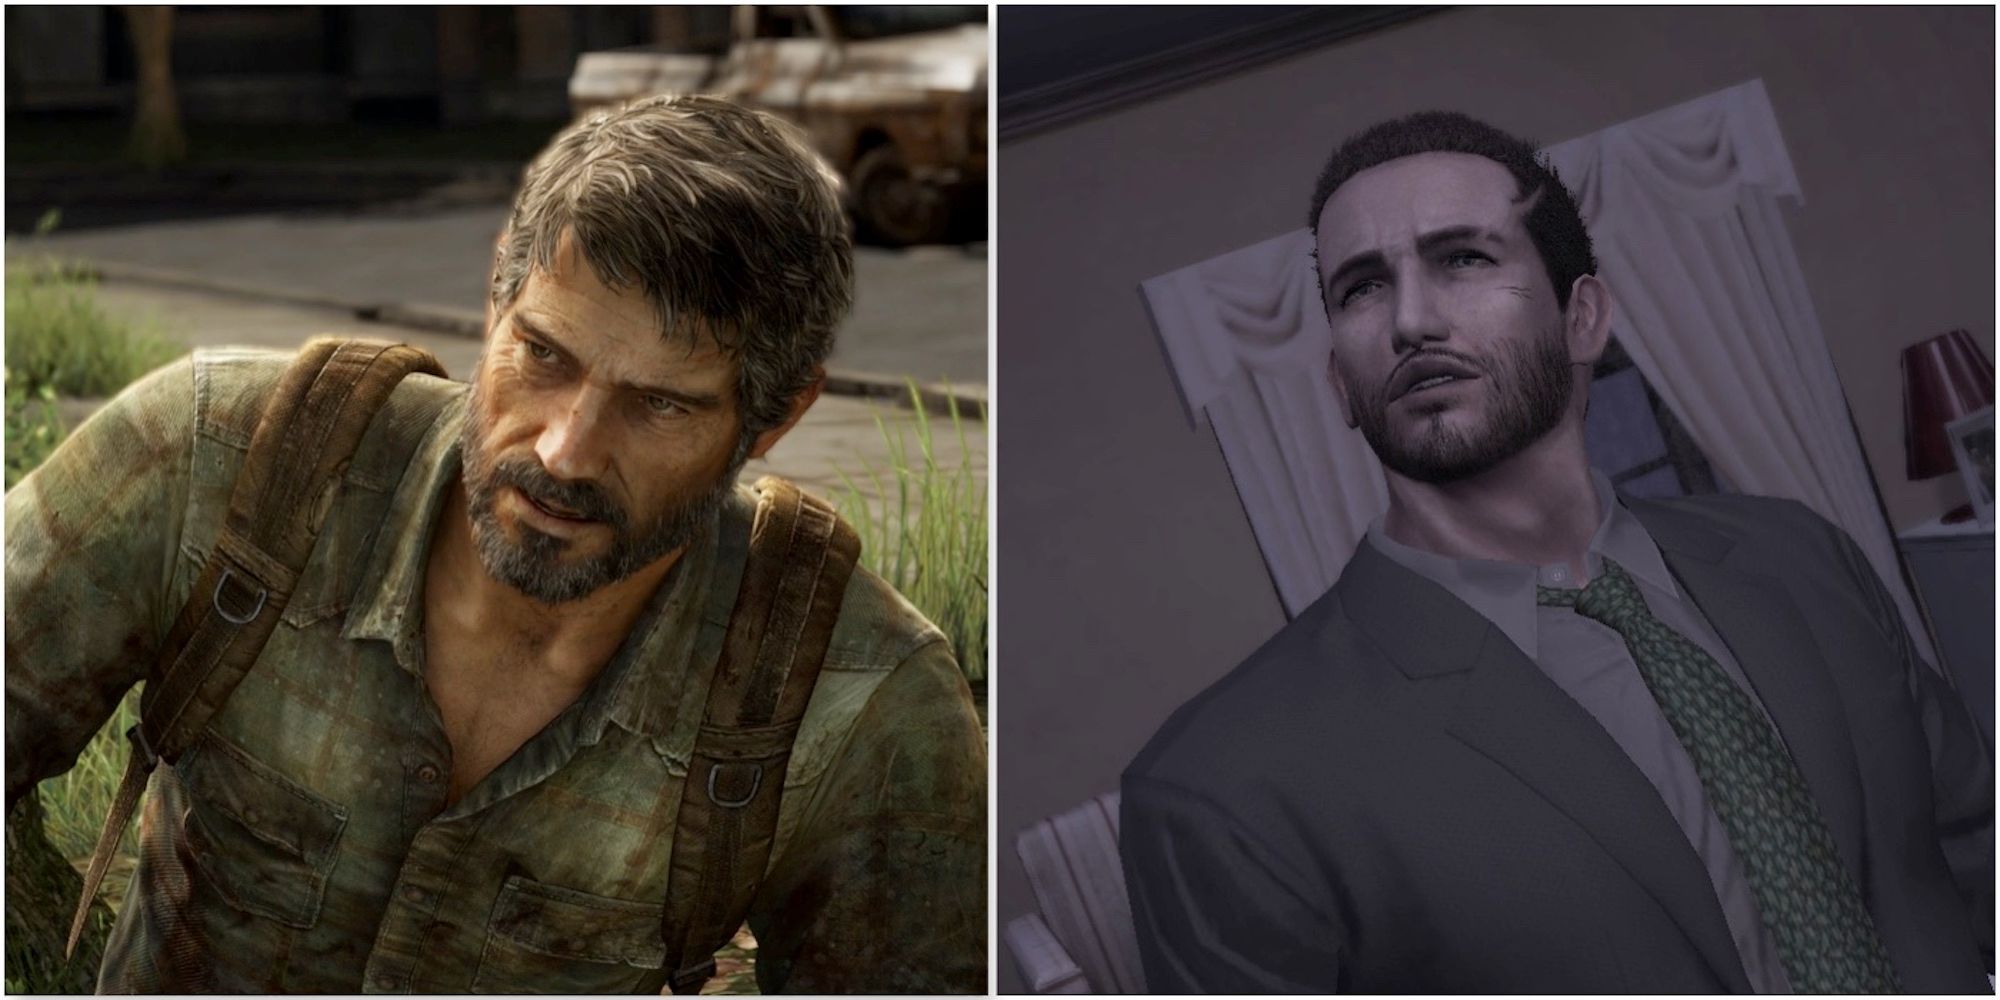 Joel in The Last Of Us and Agent Morgan in Deadly Premonition